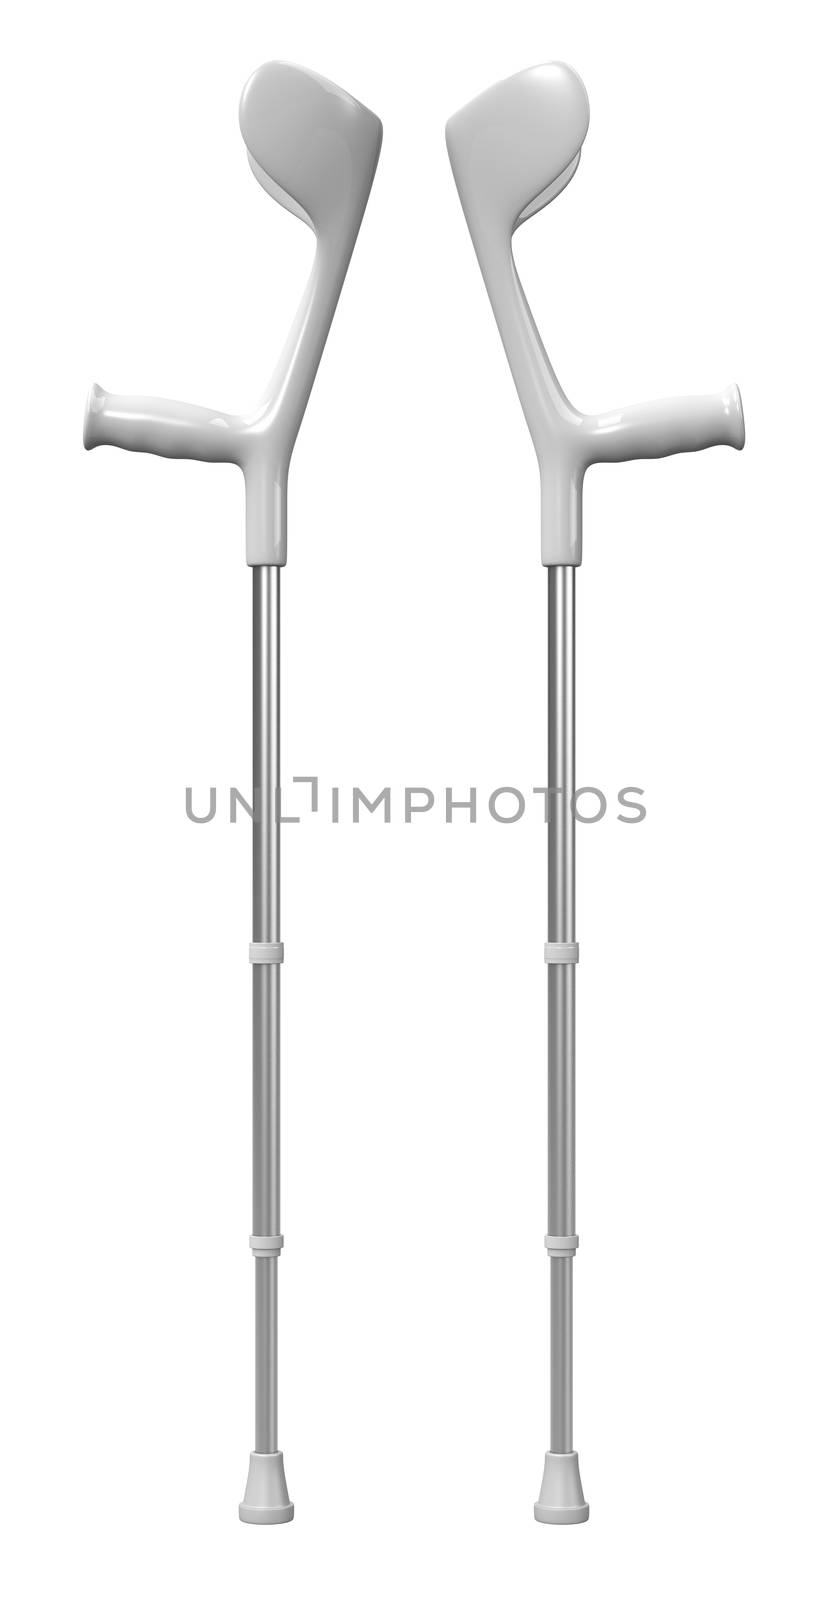 Crutch Isolated on White by make